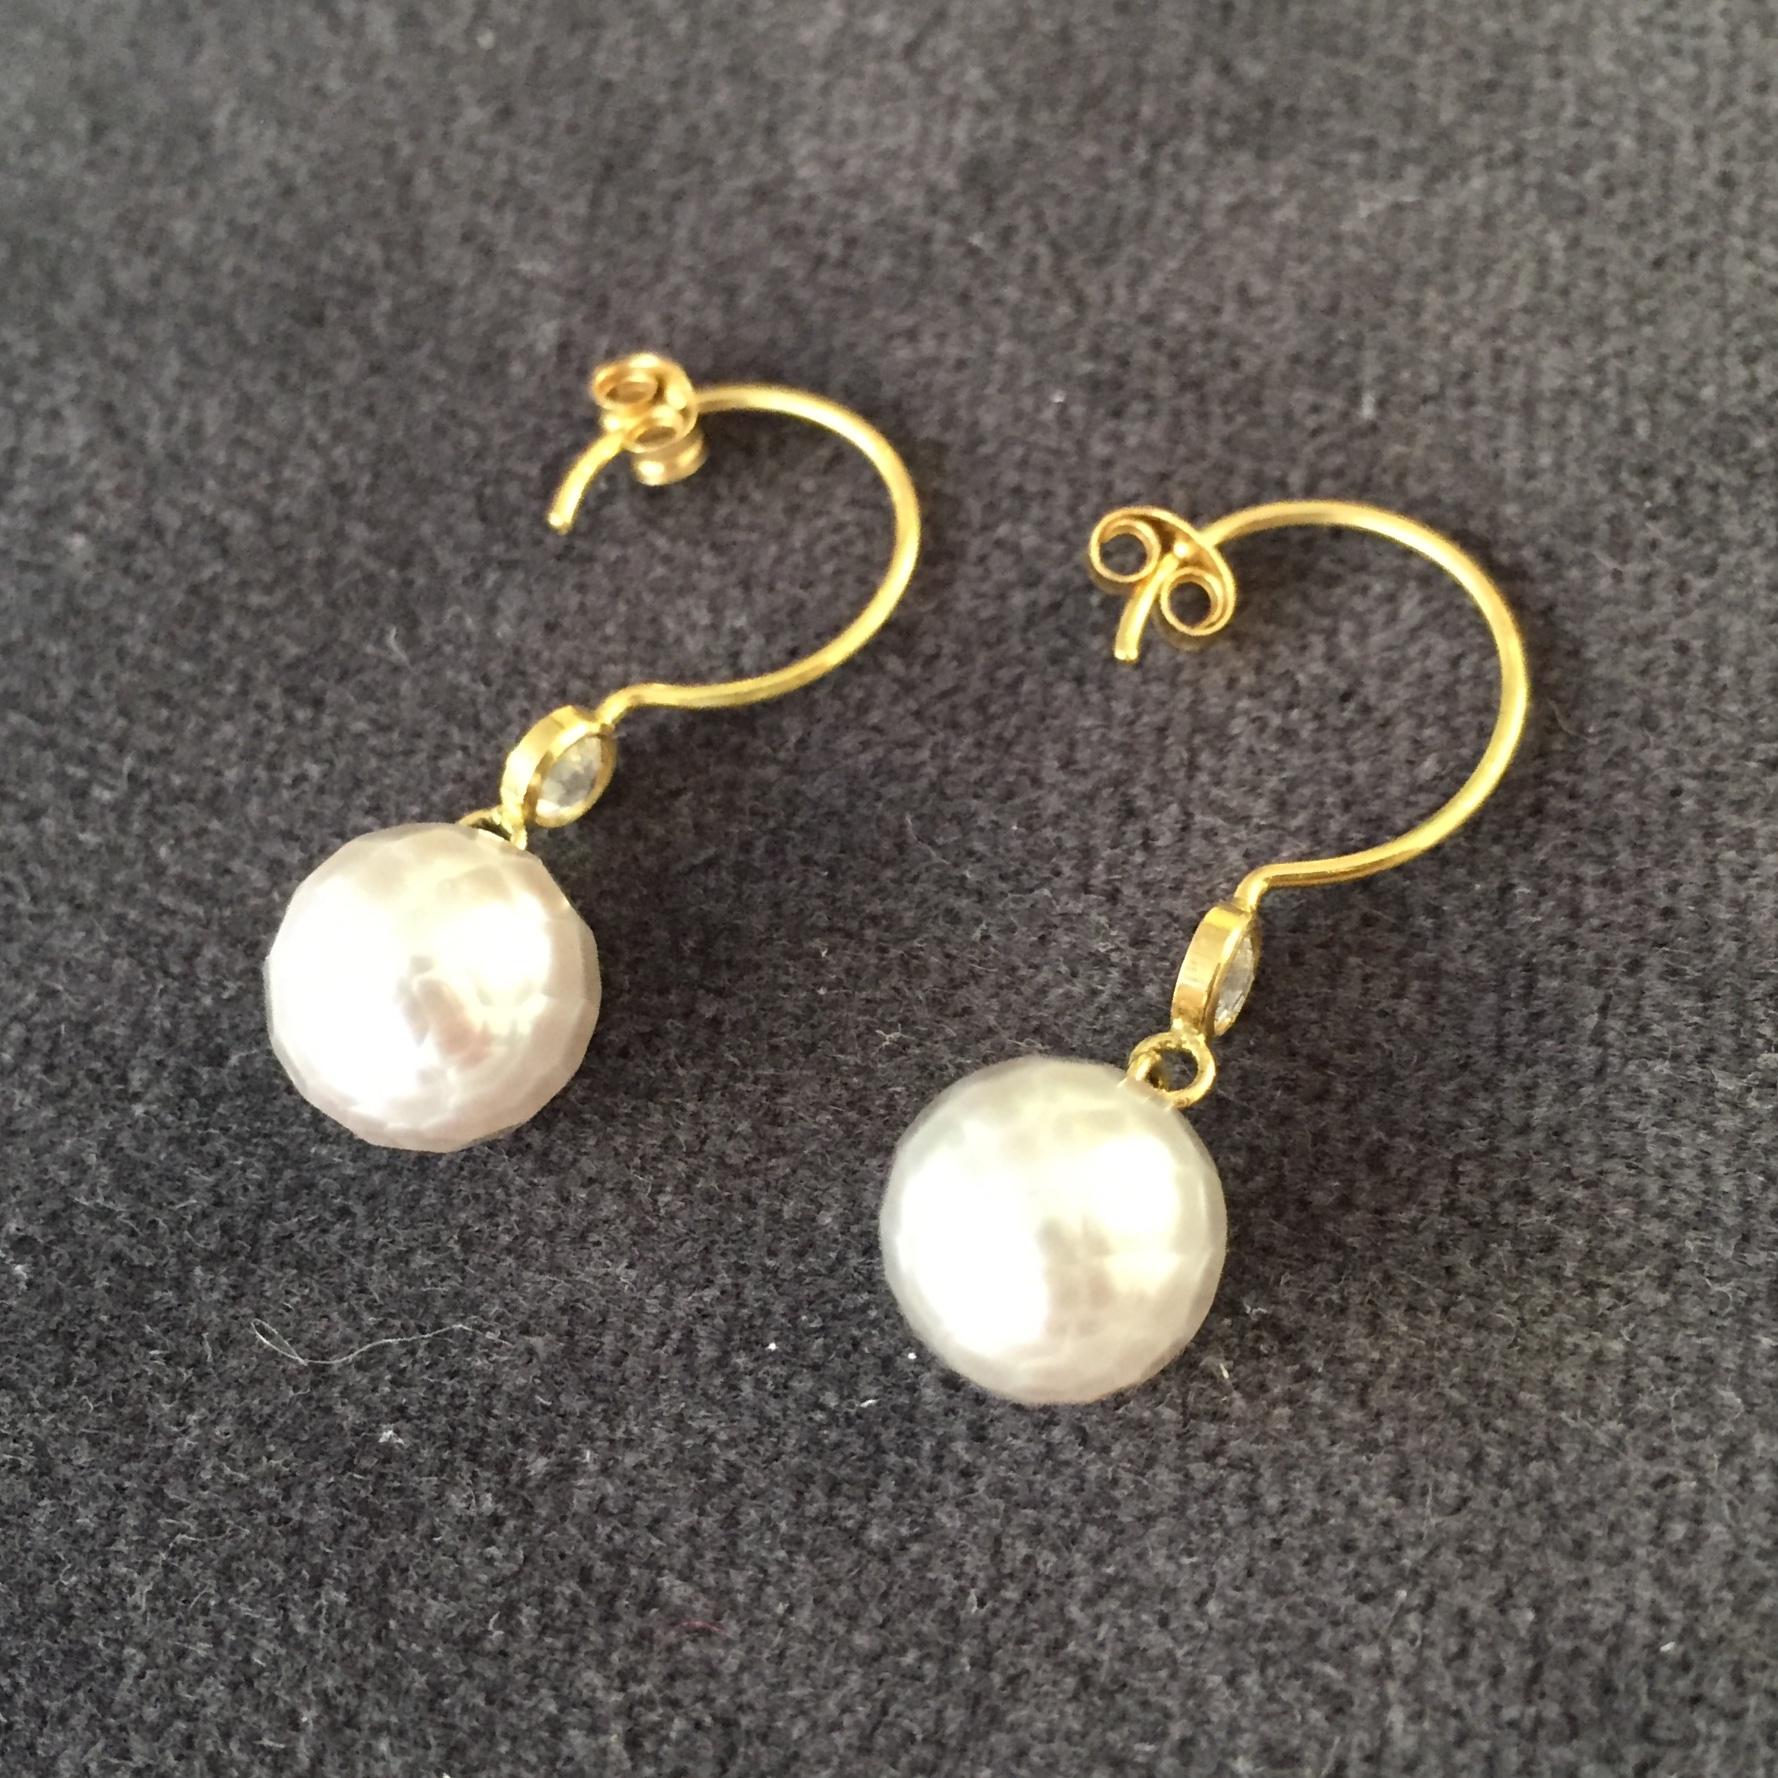 Contemporary Sweet Pea 18k Yellow Gold Small Hoop Earrings with Faceted Pearls and Diamonds